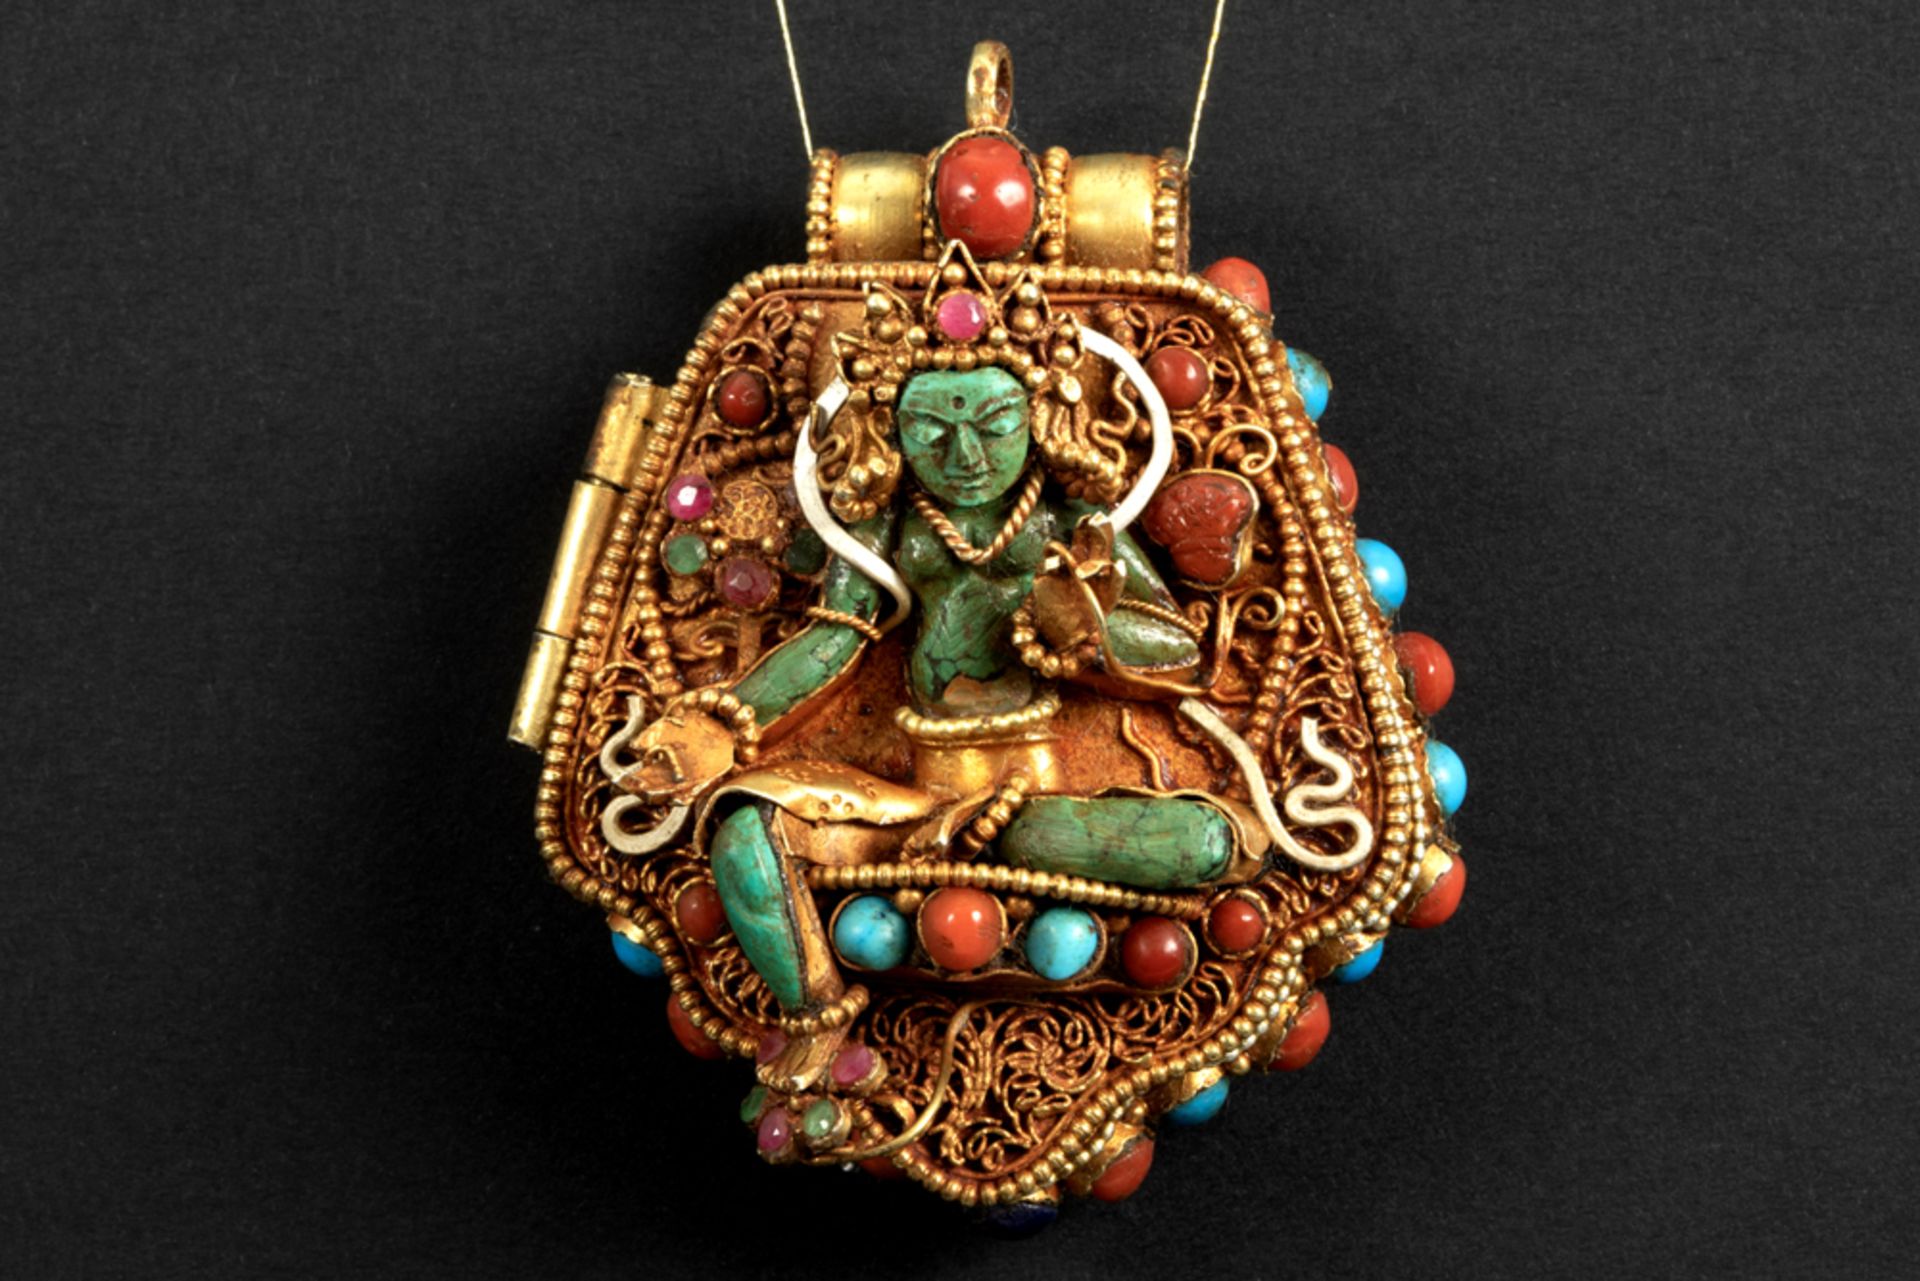 Tibeto Nepalese ghau in yellow gold on silver with turquoise, lapis lazuli, coral, ruby and